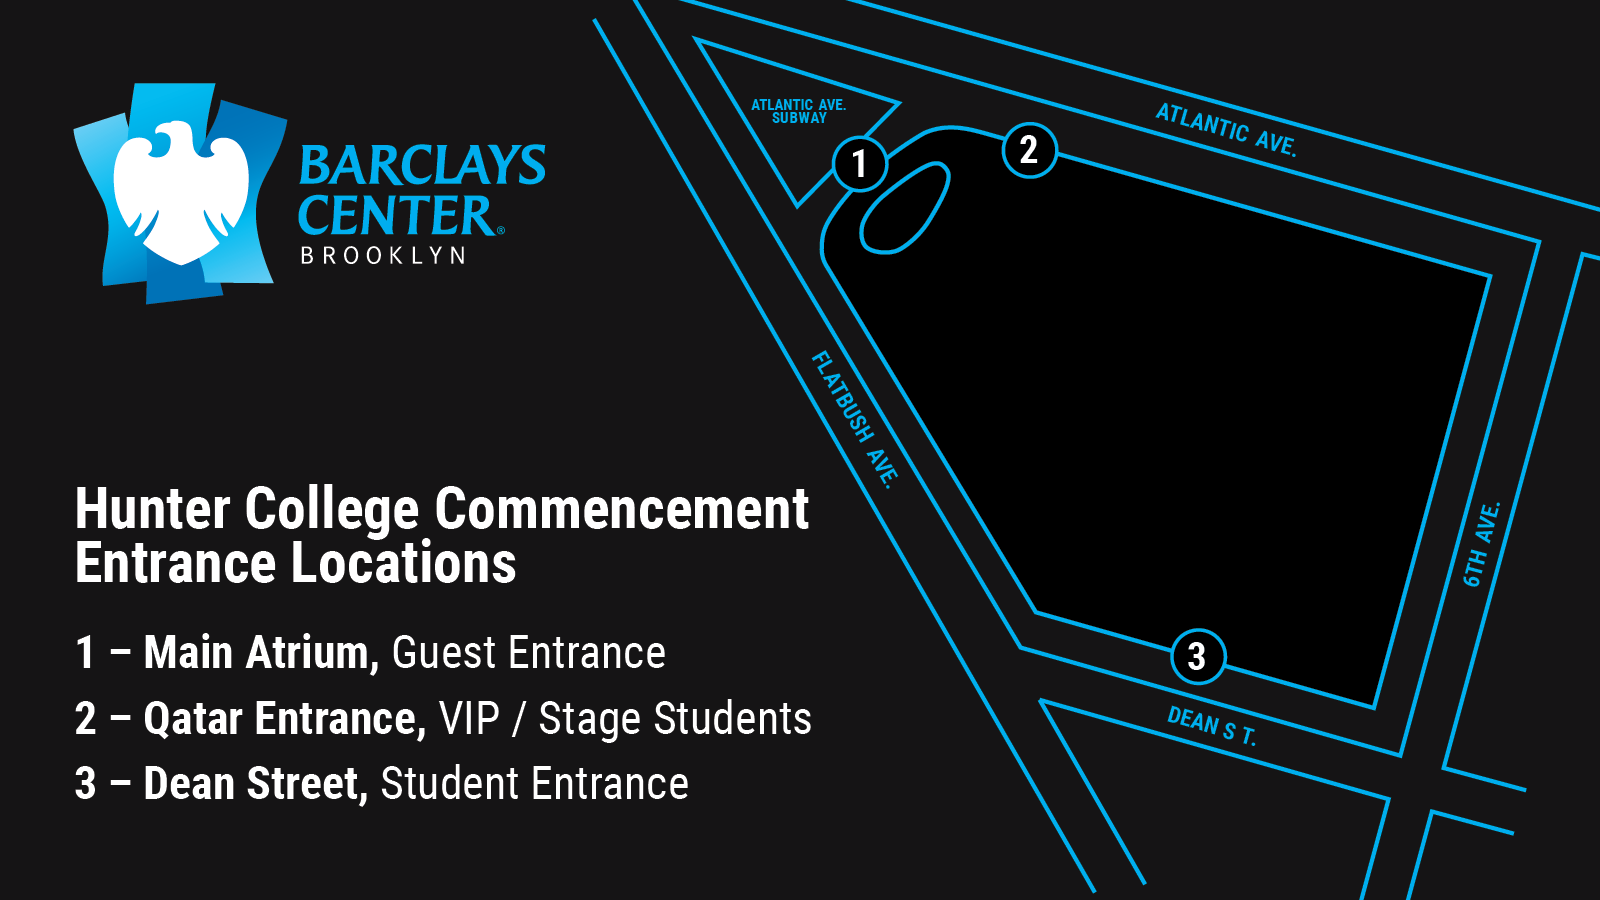 map of Barclays Center entrance locations for students, vip and faculty, guests